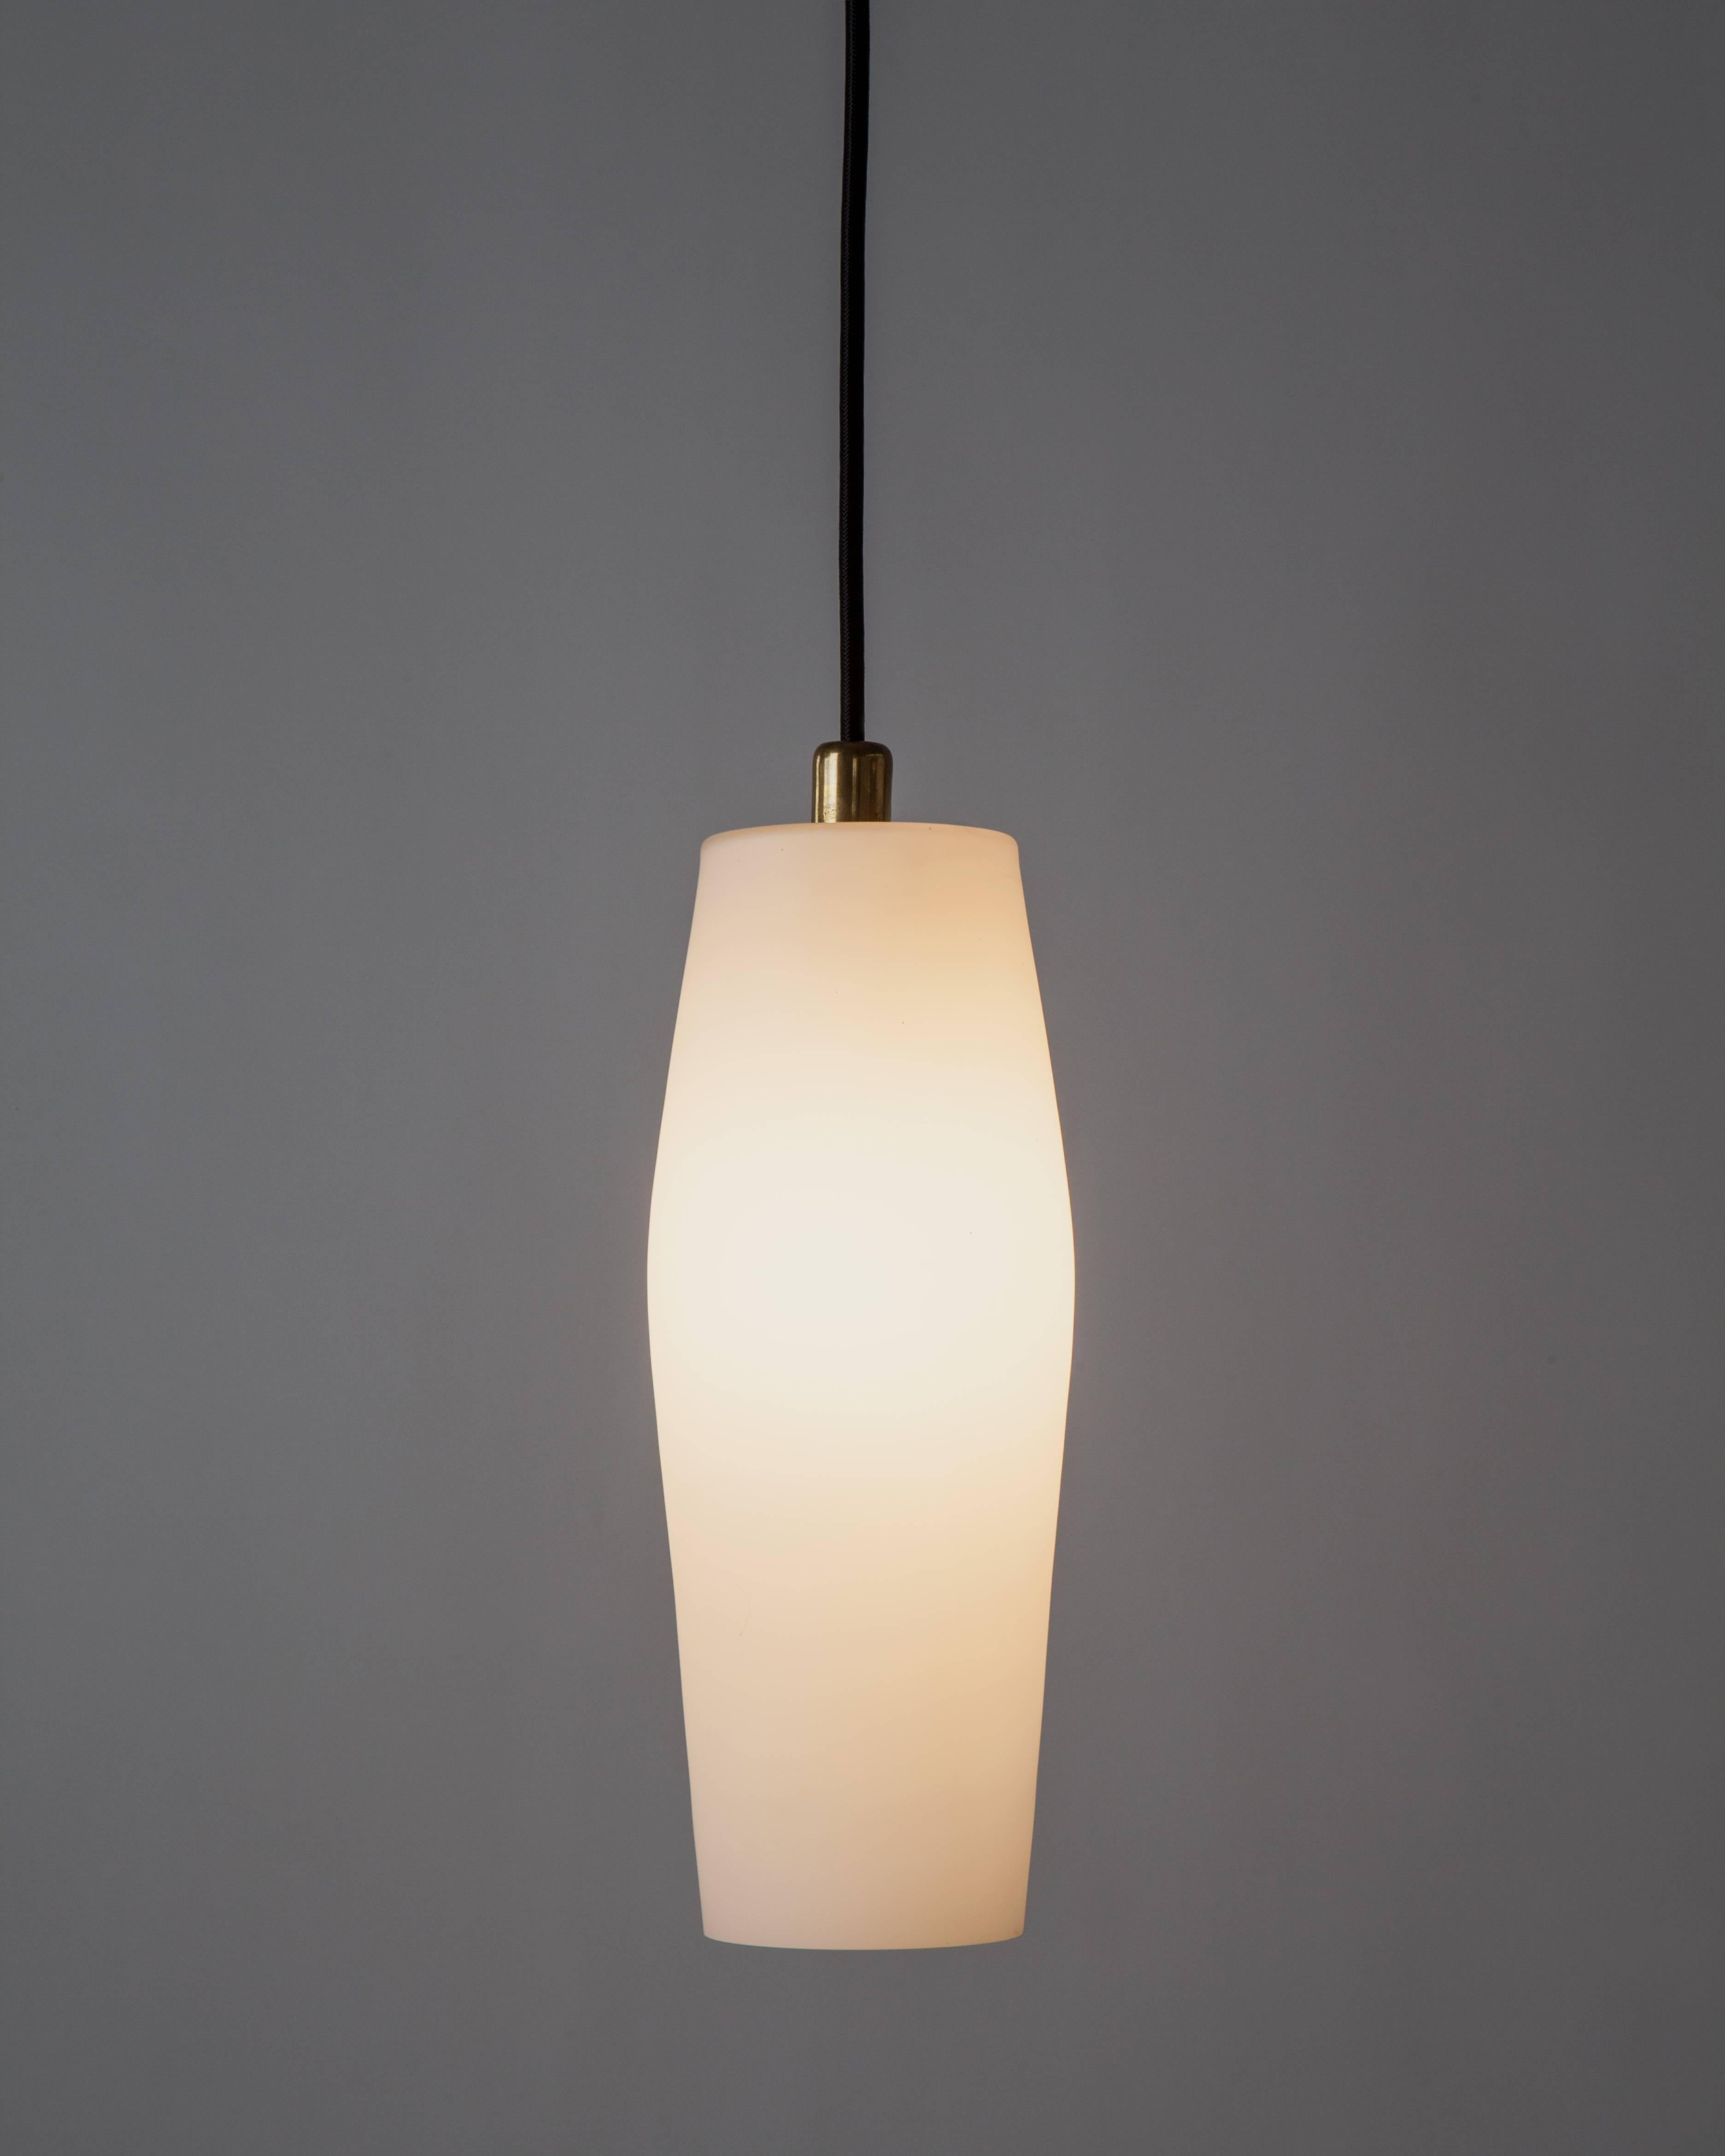 AHL4045

A Mid-Century Modern pendant having a slender urn-form frosted white glass body on its original aged brass fittings. Due to the antique nature of this fixture, there may be some nicks or imperfections in the glass as well as variations